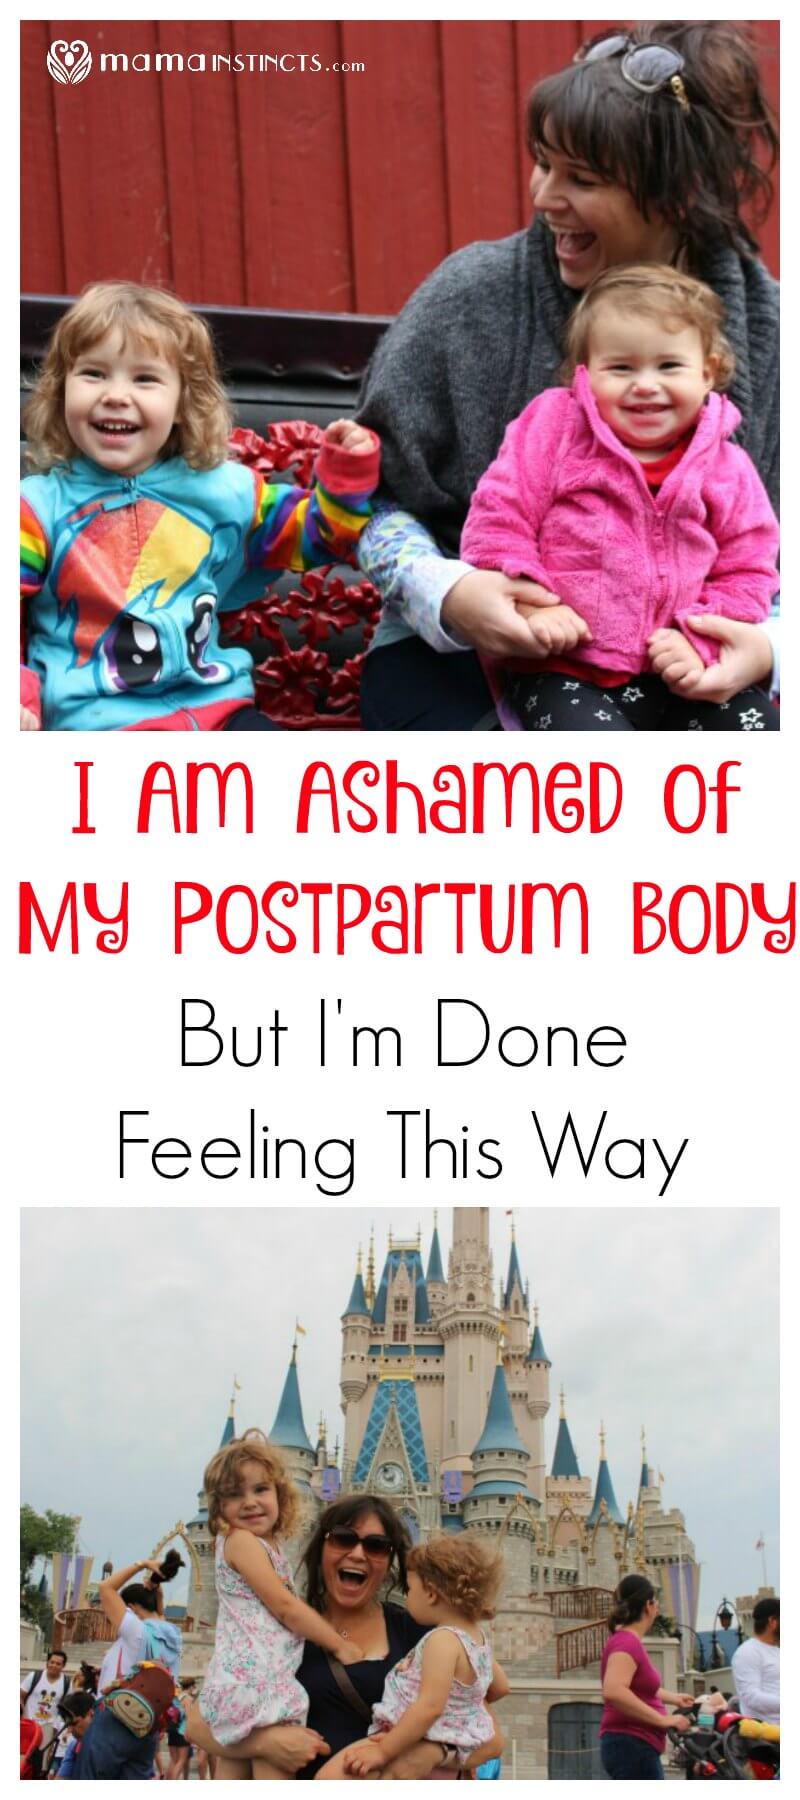 Learning to love your postpartum body is hard. A lot of us feel ashamed, in silent, but ashamed. It is time we stop feeling this way, take care of our health and embrace our new selves. #parenting #postpartum #loveyourbody